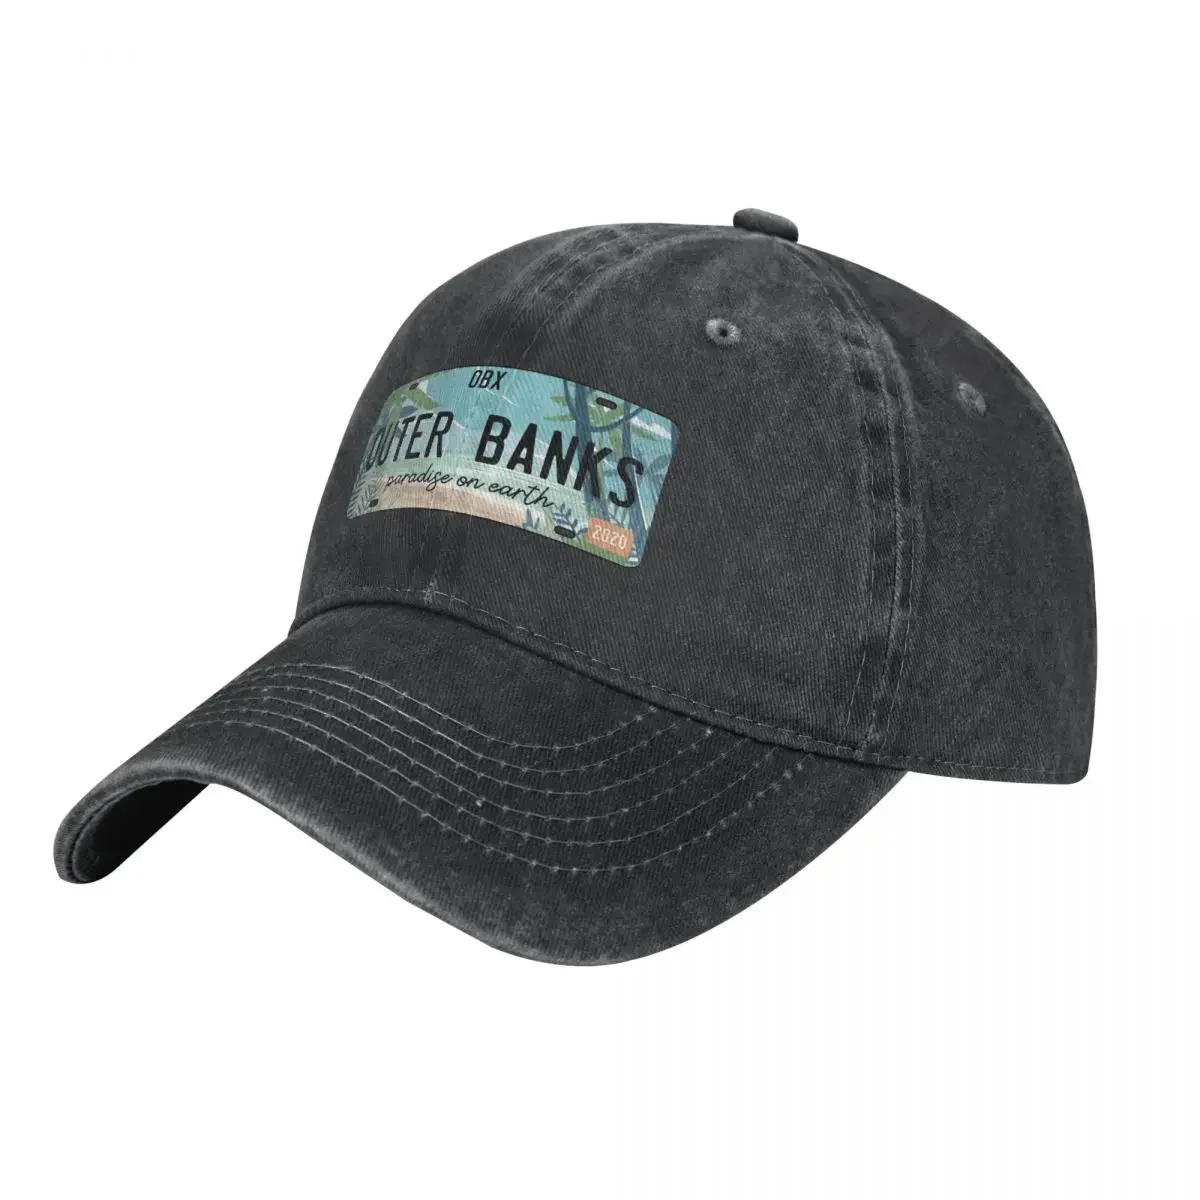 

Outer Banks License Plate (Outer Banks) Cowboy Hat Trucker Hat Icon fashionable Luxury Cap Hats For Women Men's